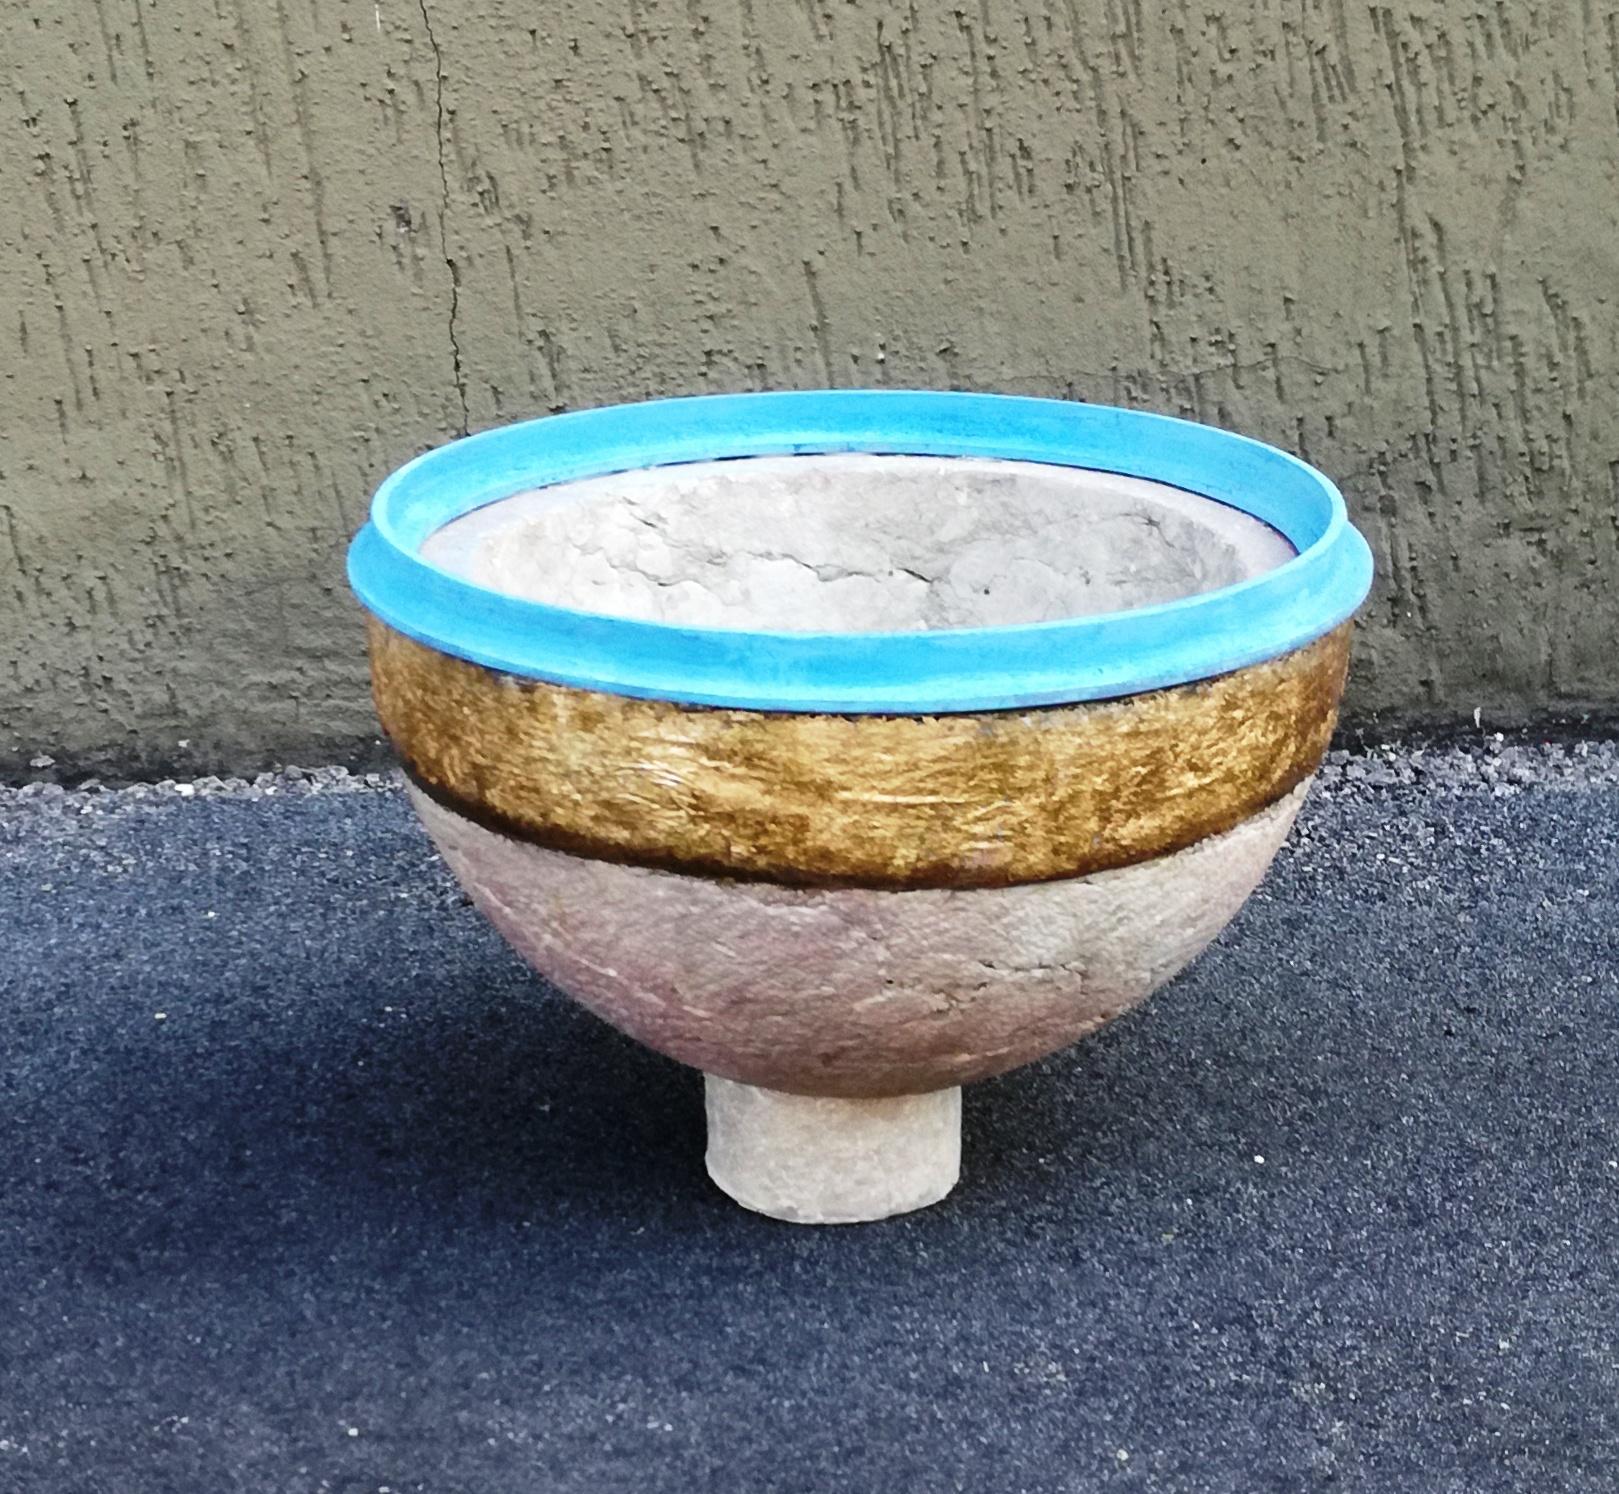 small Jerusalem stone stoup, transformed into a sculpture by master Valter berni. the bowl was originally chipped and ruined, Valter's intervention made it possible to derive a small jewel of art. gold leaf to coat the top edge, and iron ring